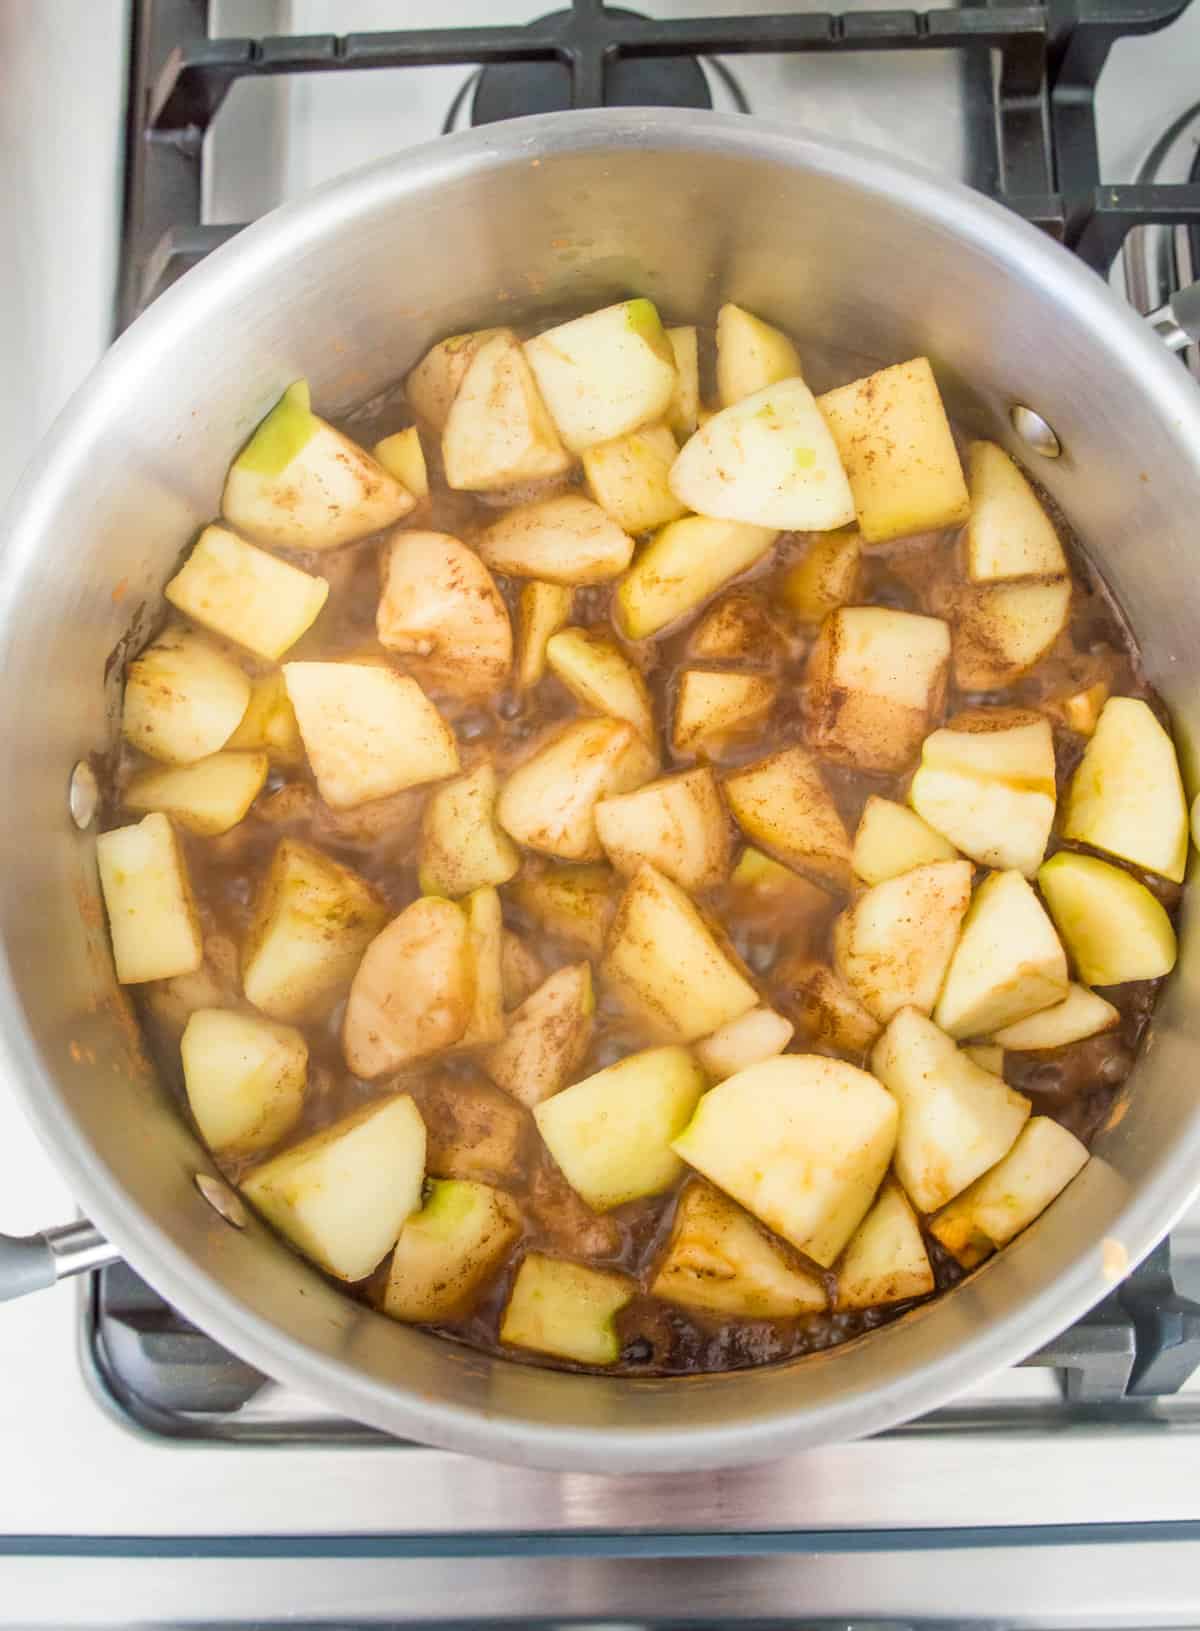 Chopped and peel apples boiling in a pot of water on the stovetop.